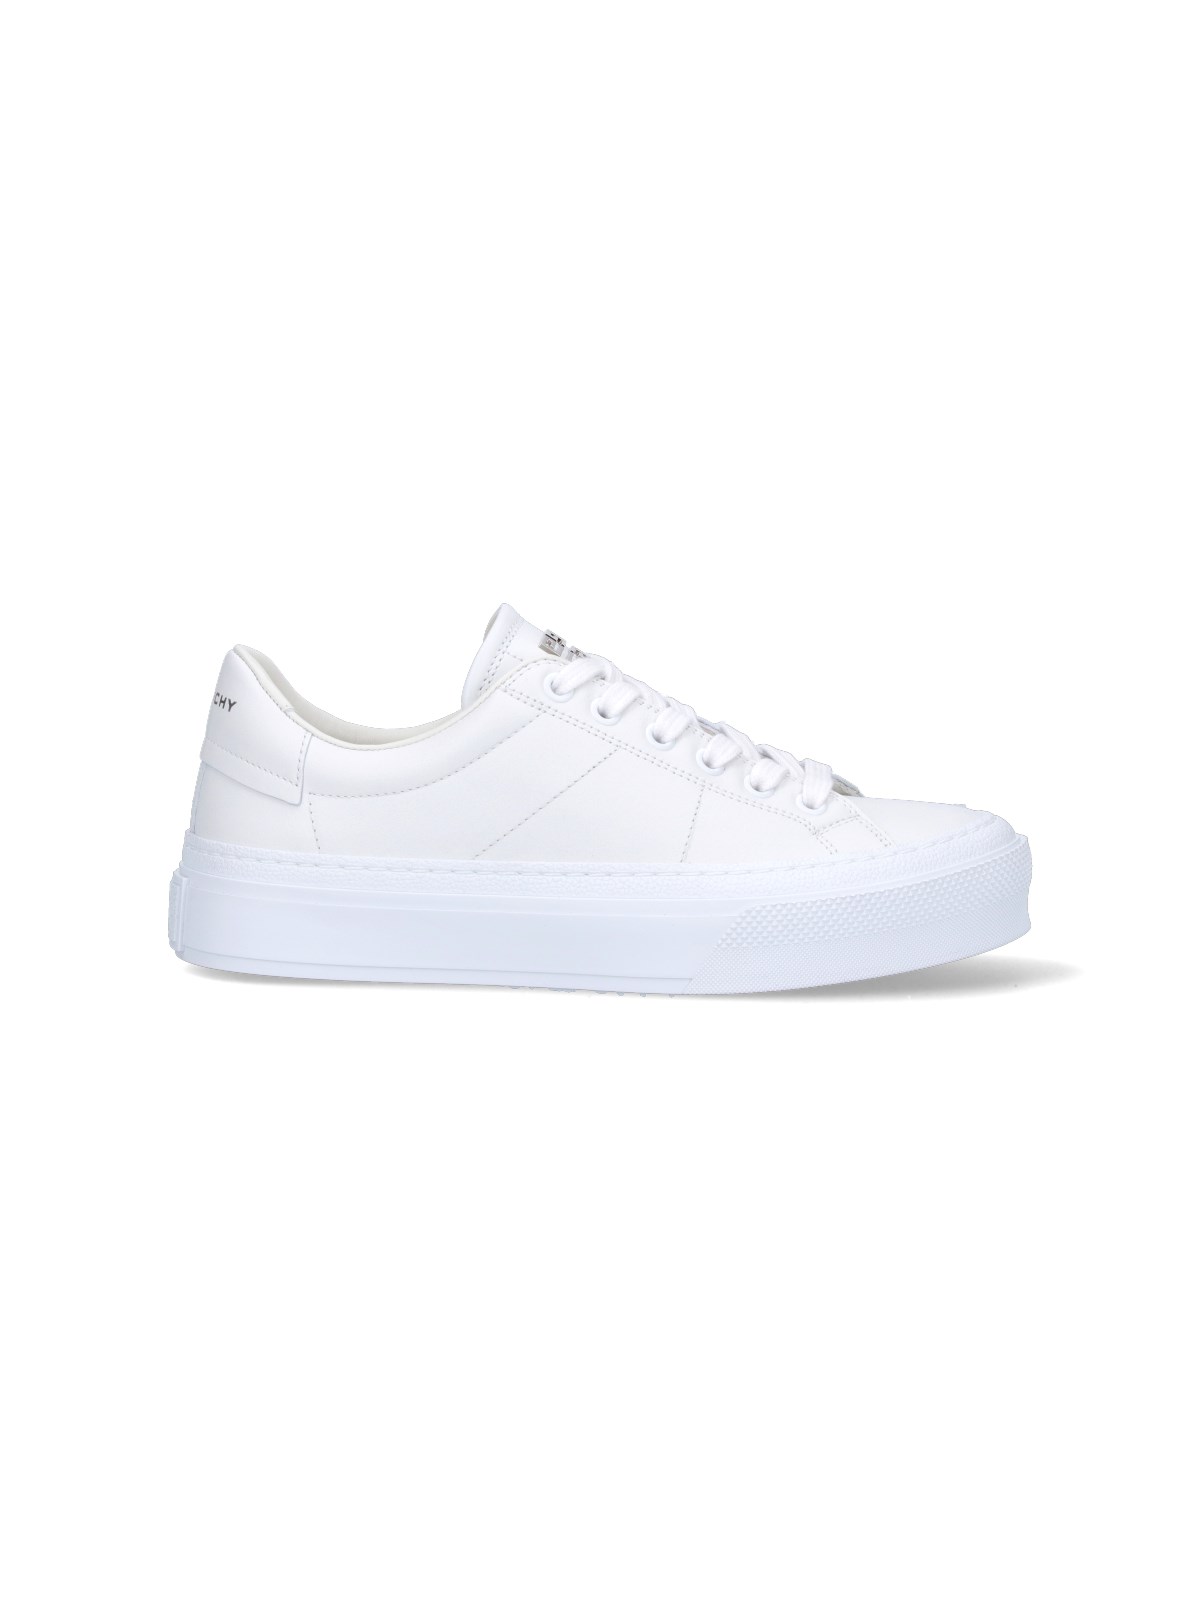 Givenchy Low Sneakers In White